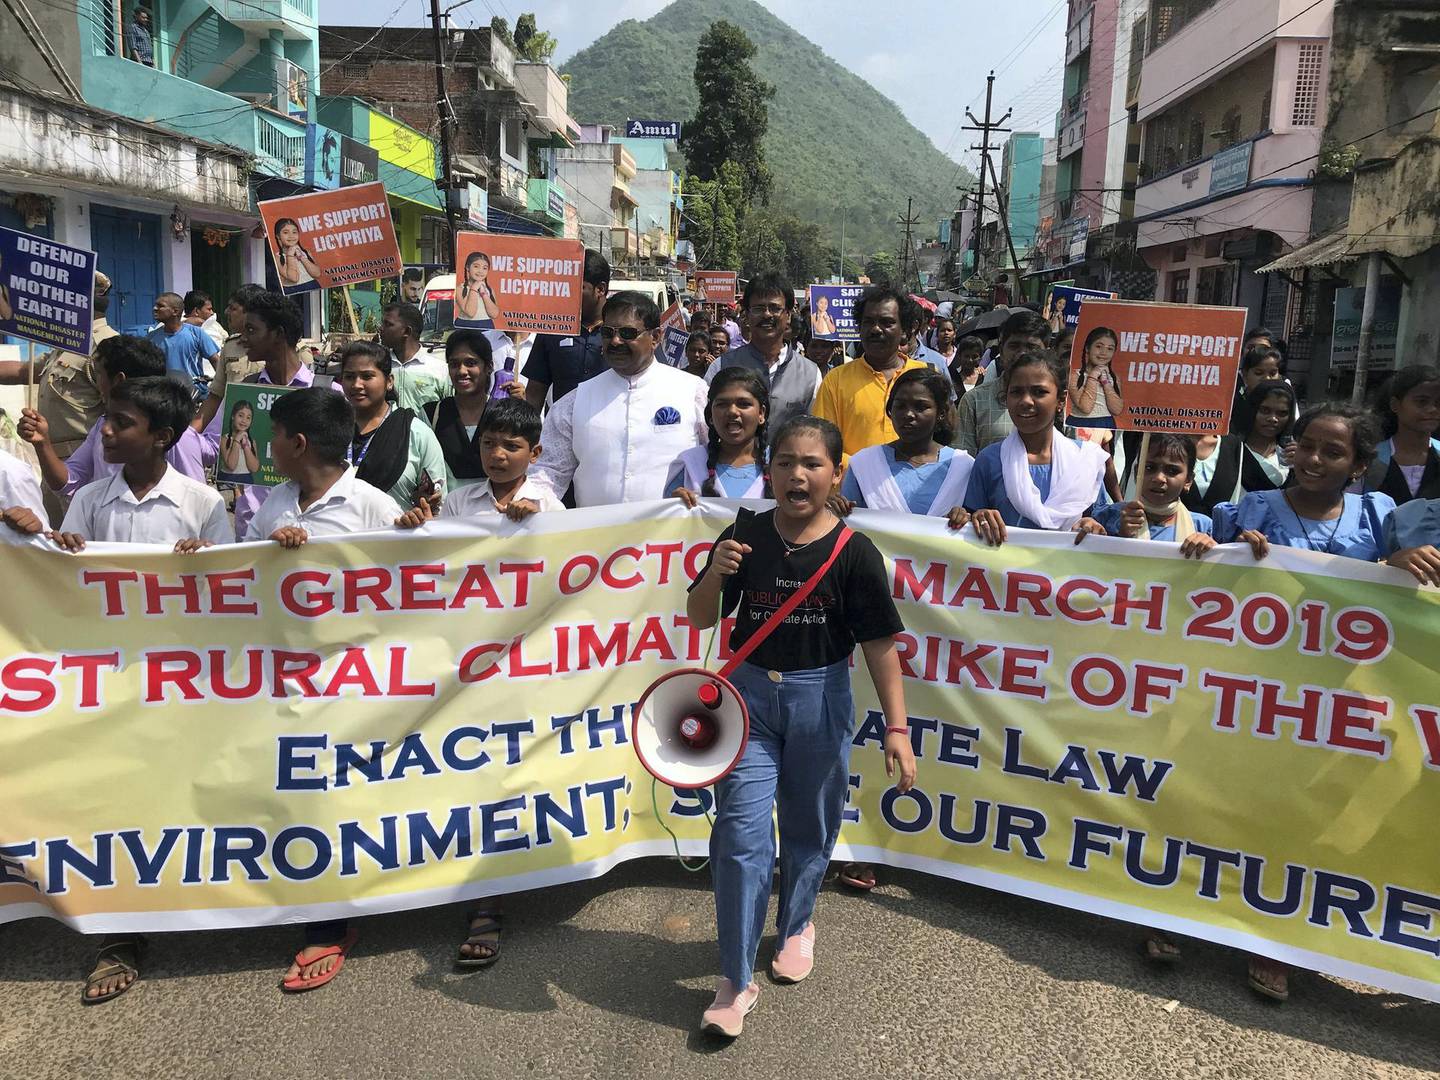 Licypriya Kangujam leads the historic Great October March 2019 amid India's biggest rural climate strike